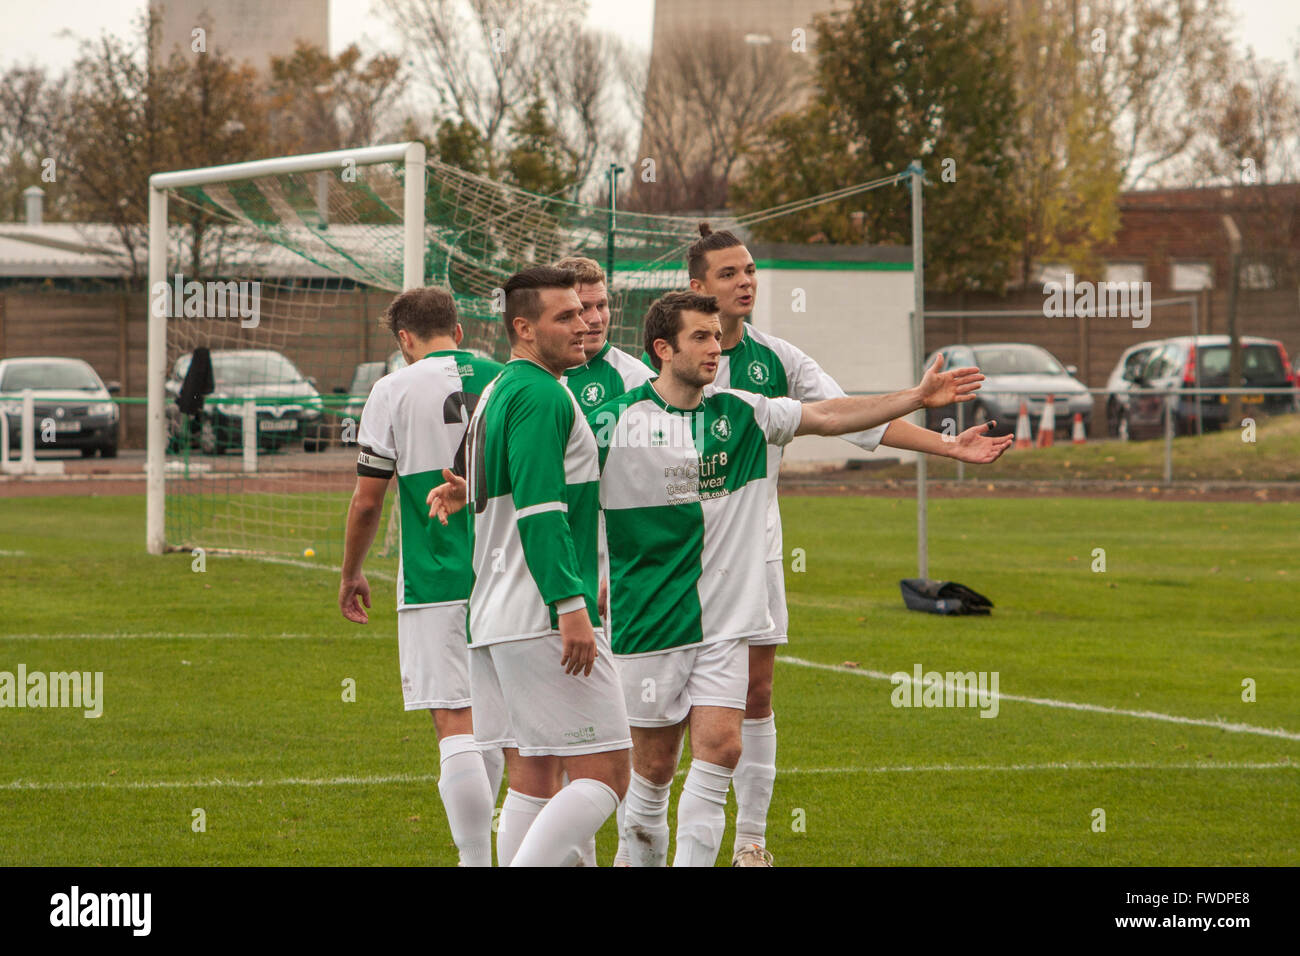 Billingham Synthonia footballers disputing the award of a penalty by the referee at an amateur football match in England. Stock Photo